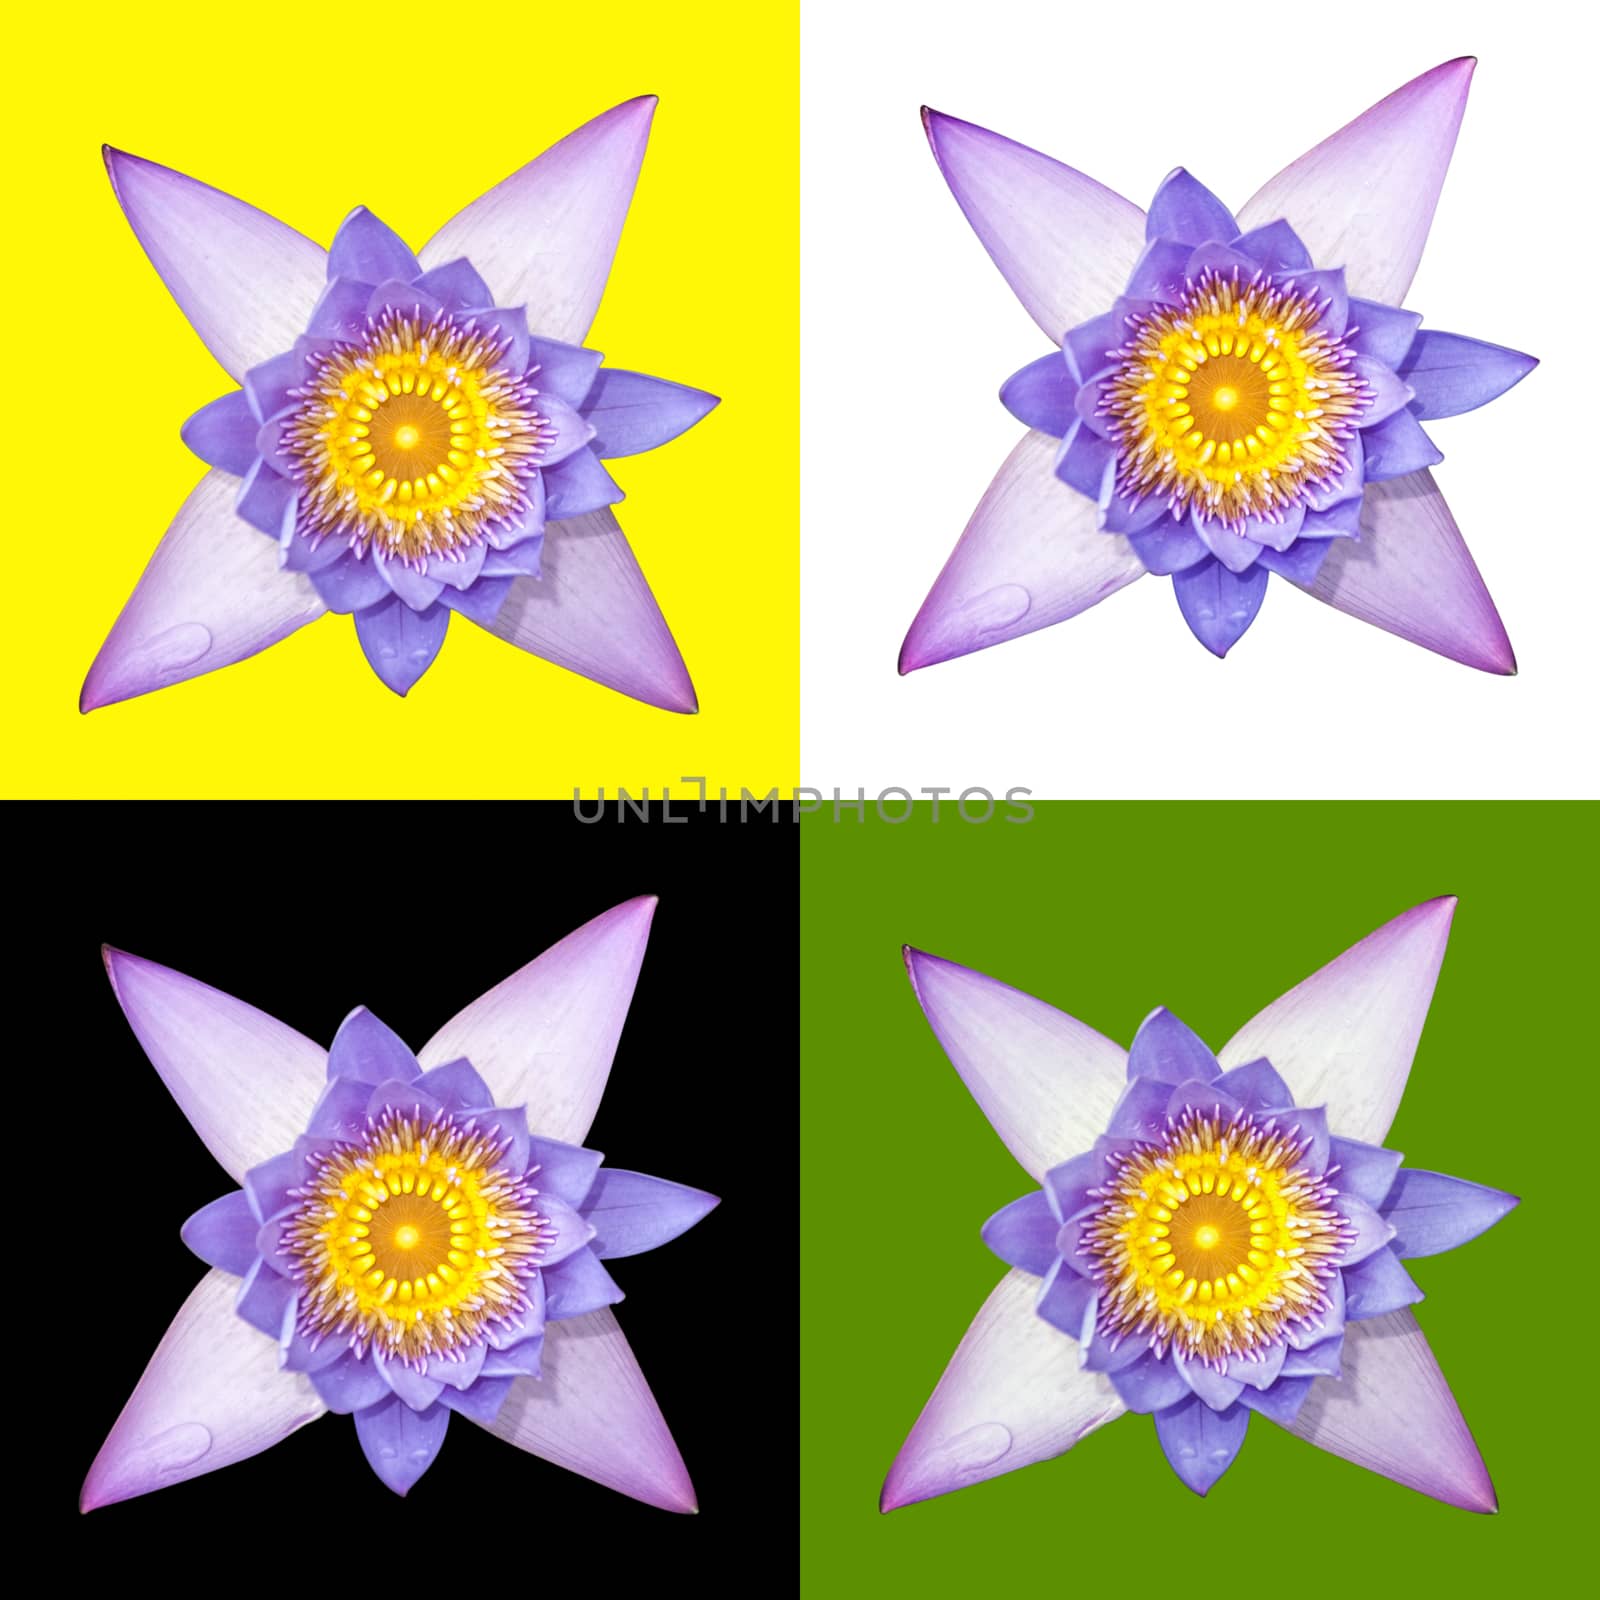 blue-flowered water lily isolated against yellow, white, black and green background